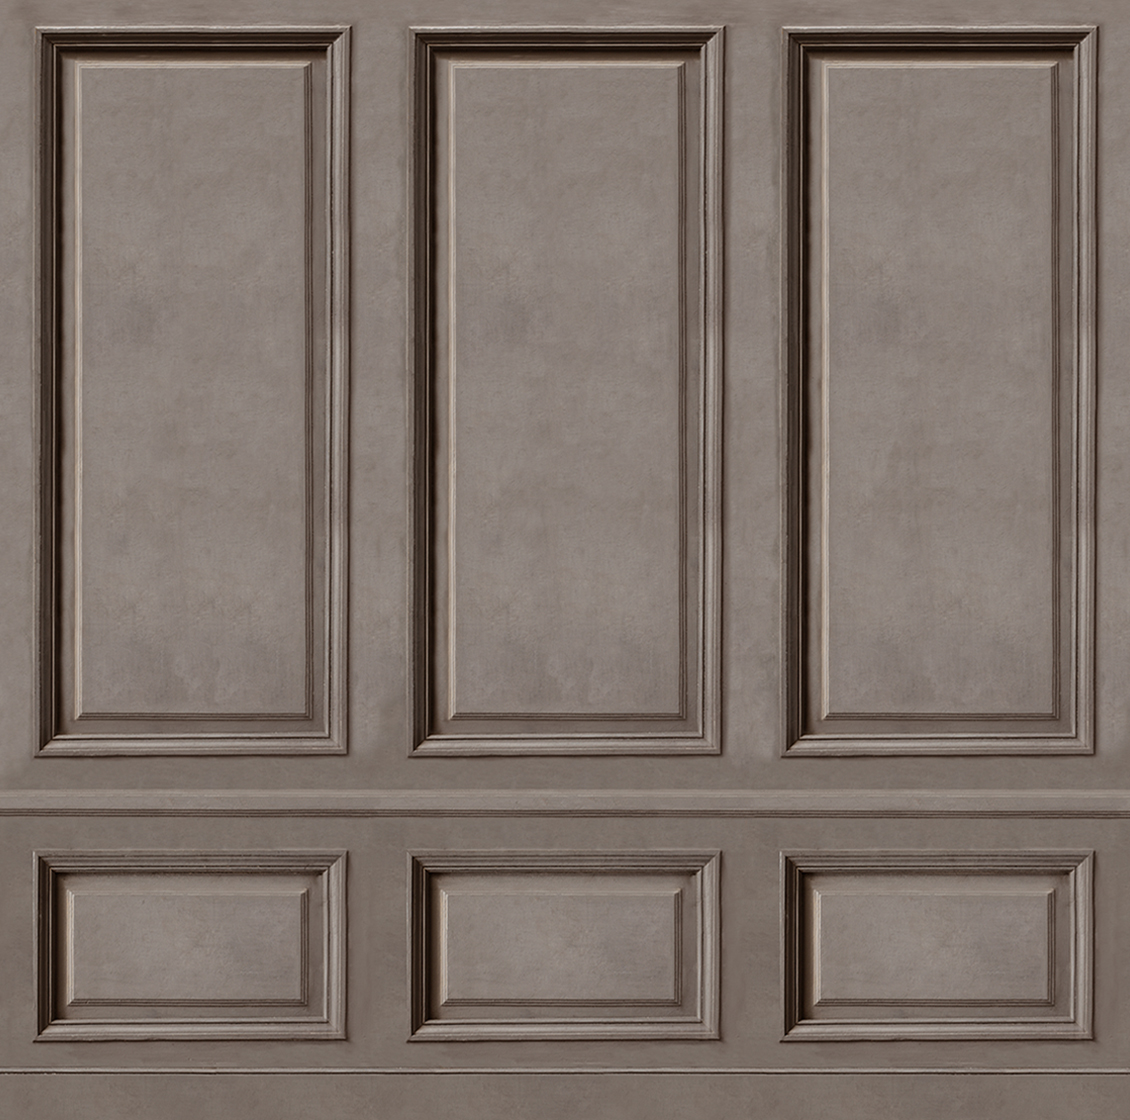 Classical boiserie wallpaper with effect realistic in brown color